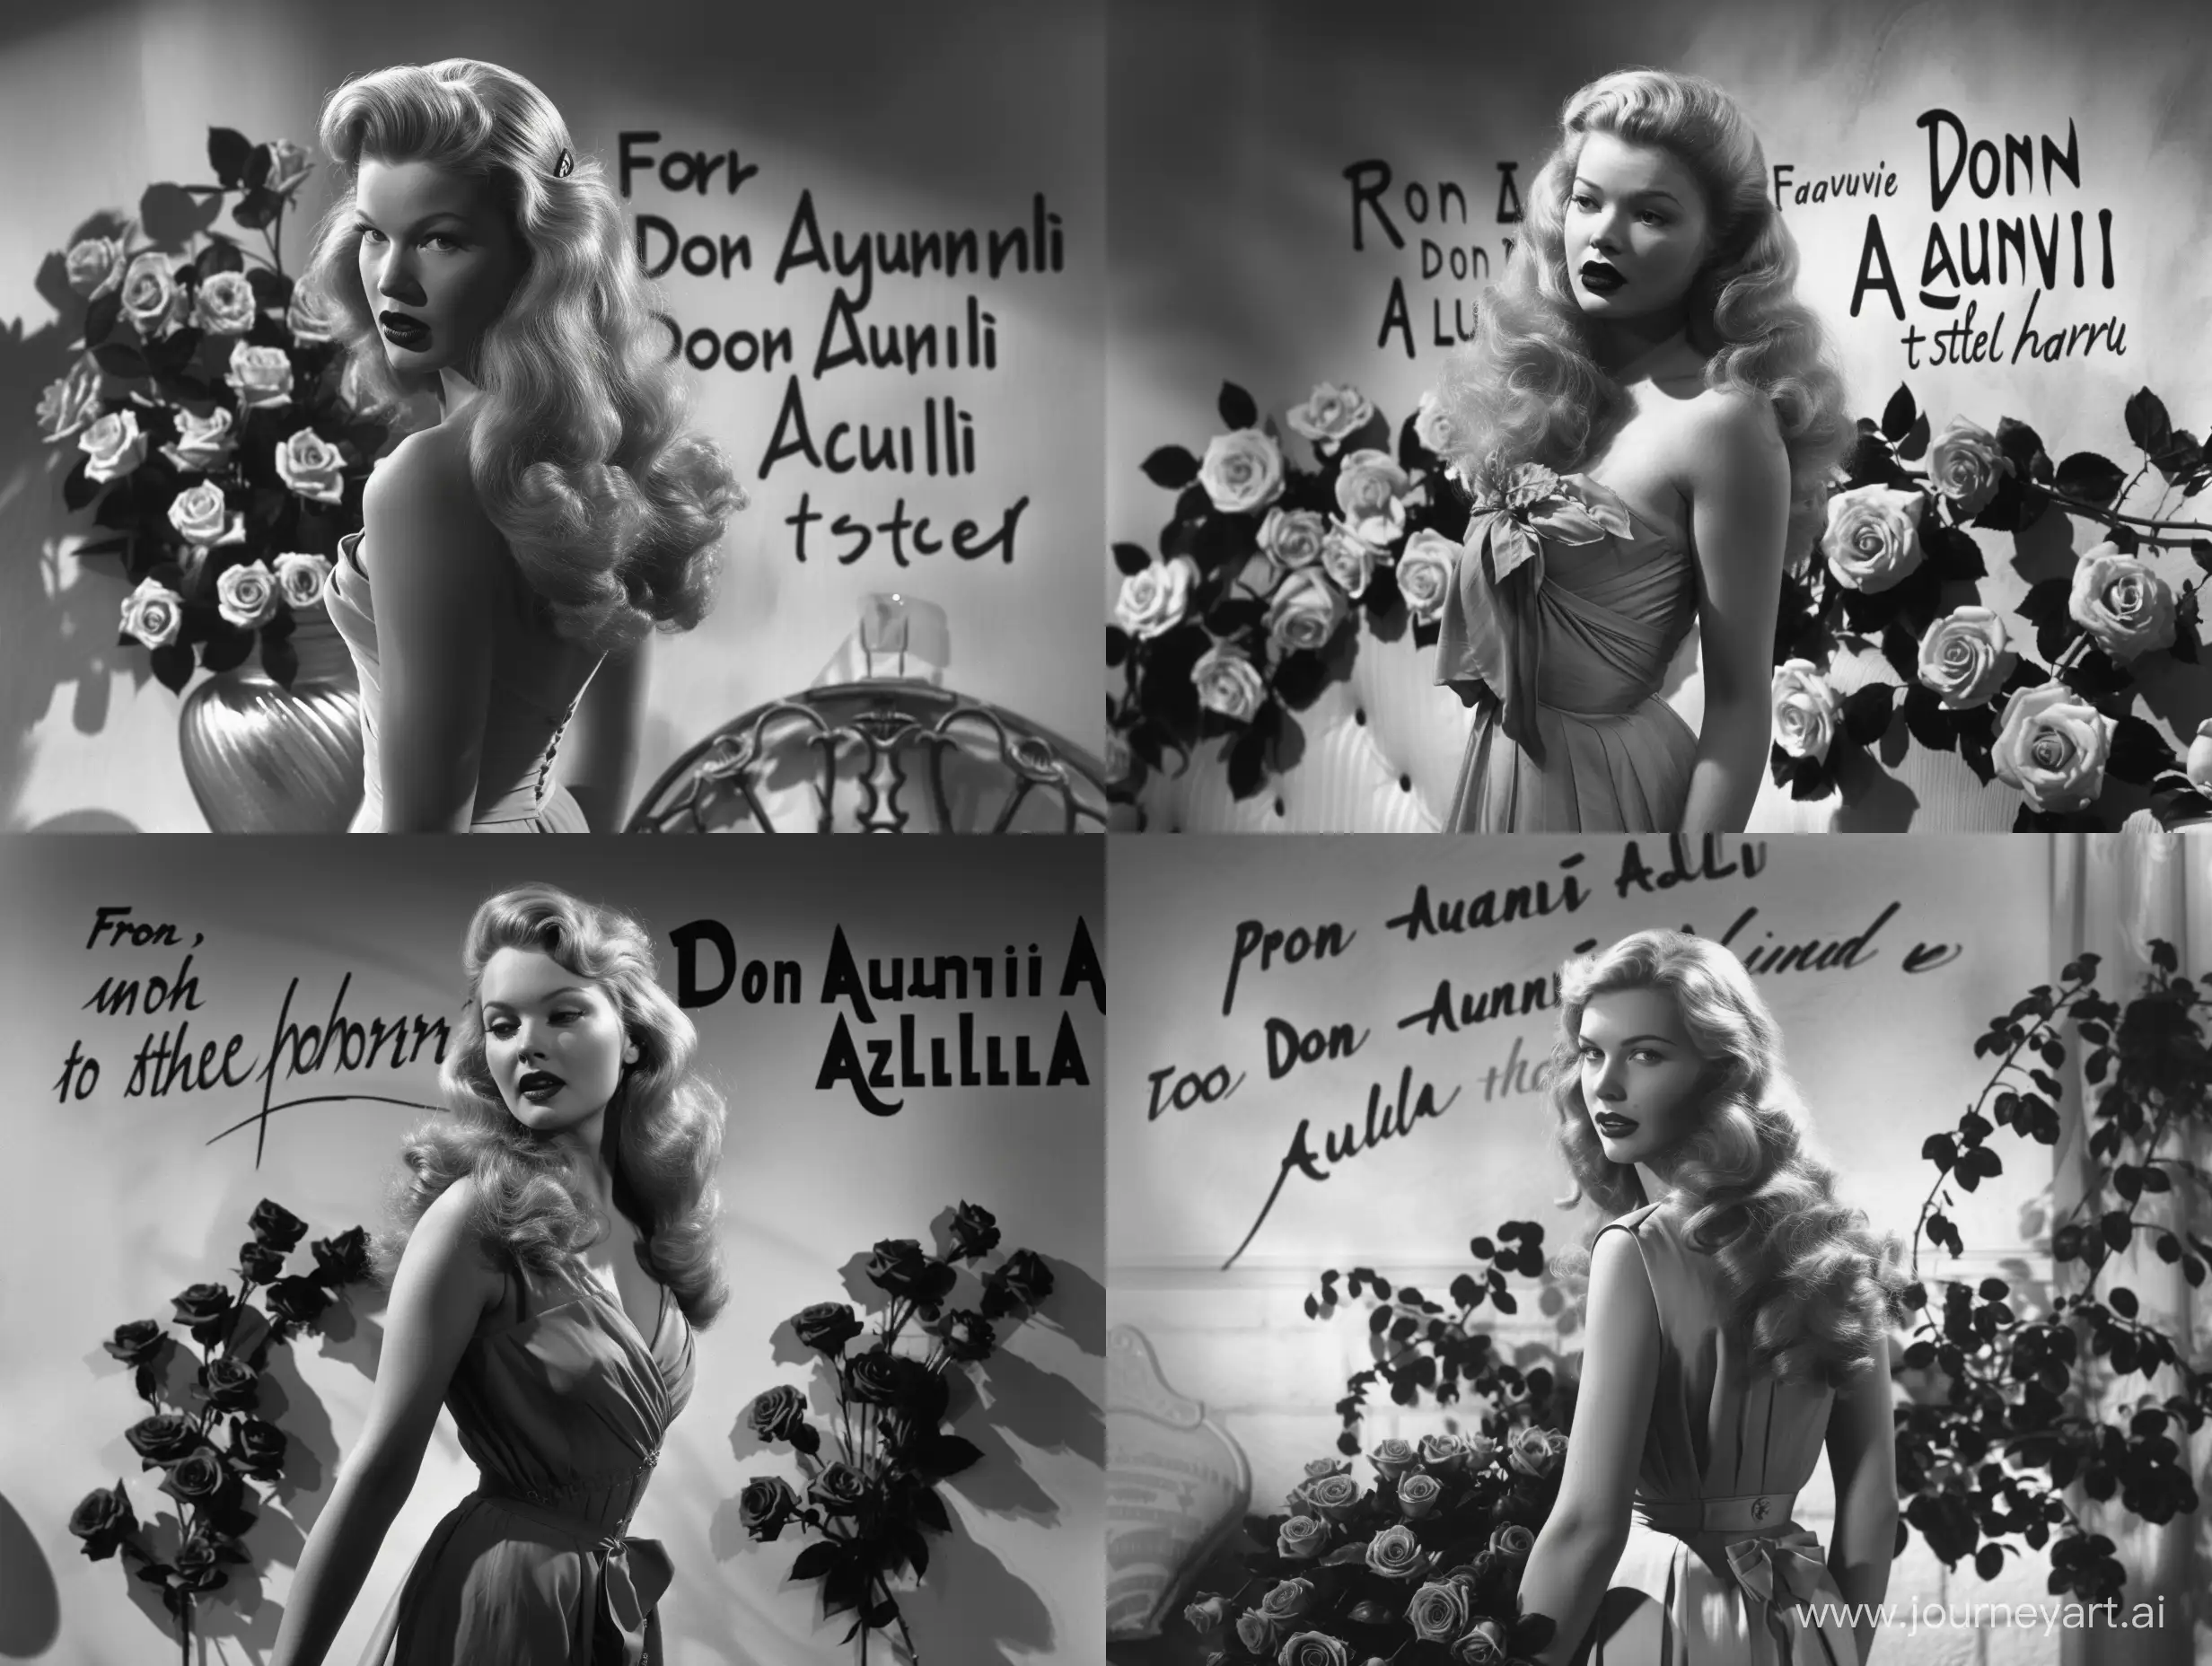 Noir shot of a glamorous 1940s pretty long-haired blonde actress in a 1940s hotel room filed with roses, on the wall a large writing that says "From Don Avanti Aquila, to a woman who stole his heart"